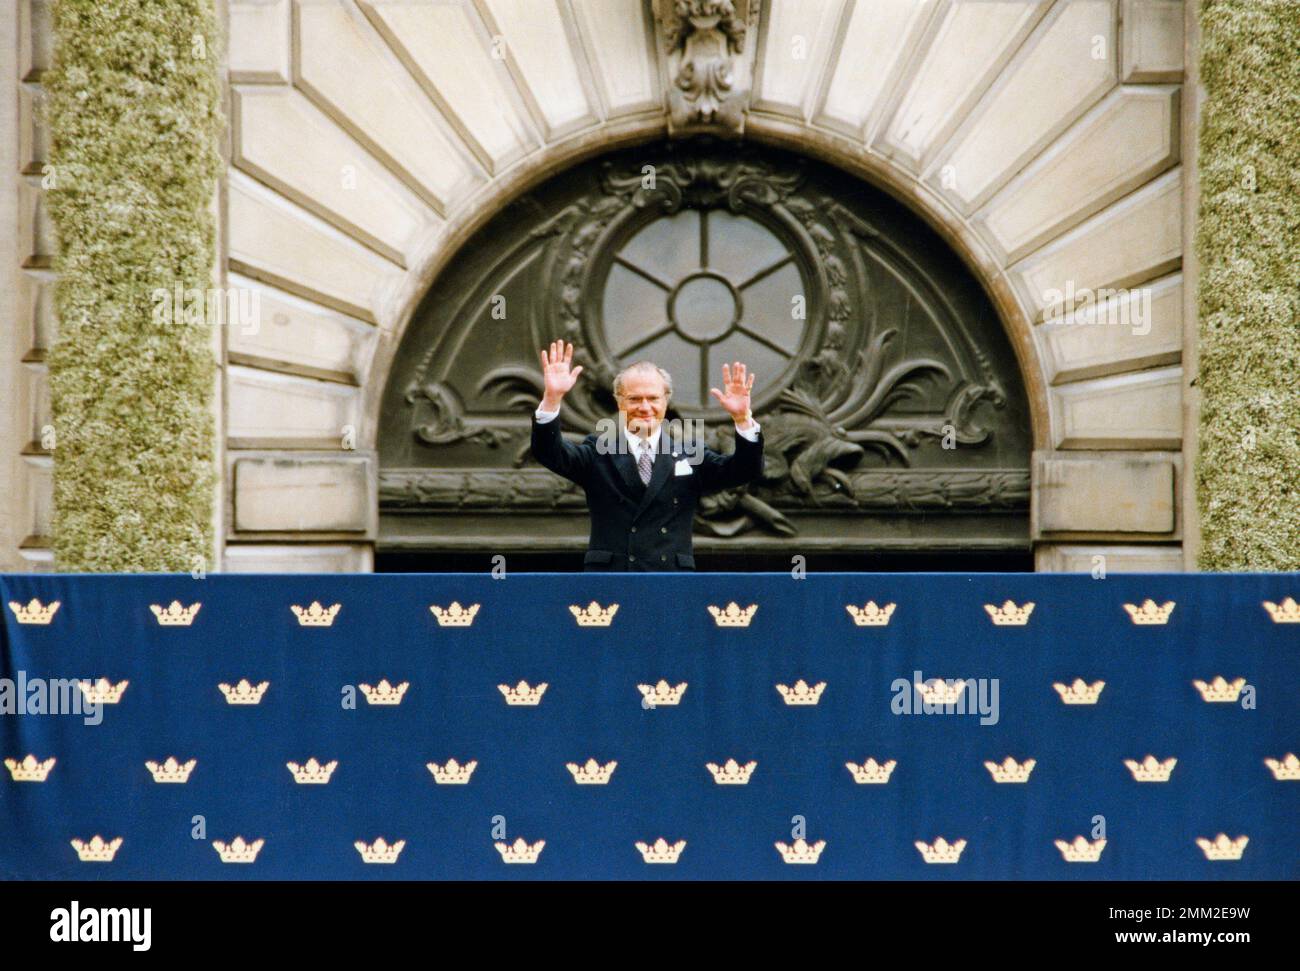 Carl XVI Gustaf, King of Sweden. Born 30 april 1946.  King Carl XVI Gustaf on the balcony of Stockholm royal castle, recieving greetings on his 50th birthday April 30 1996 Stock Photo